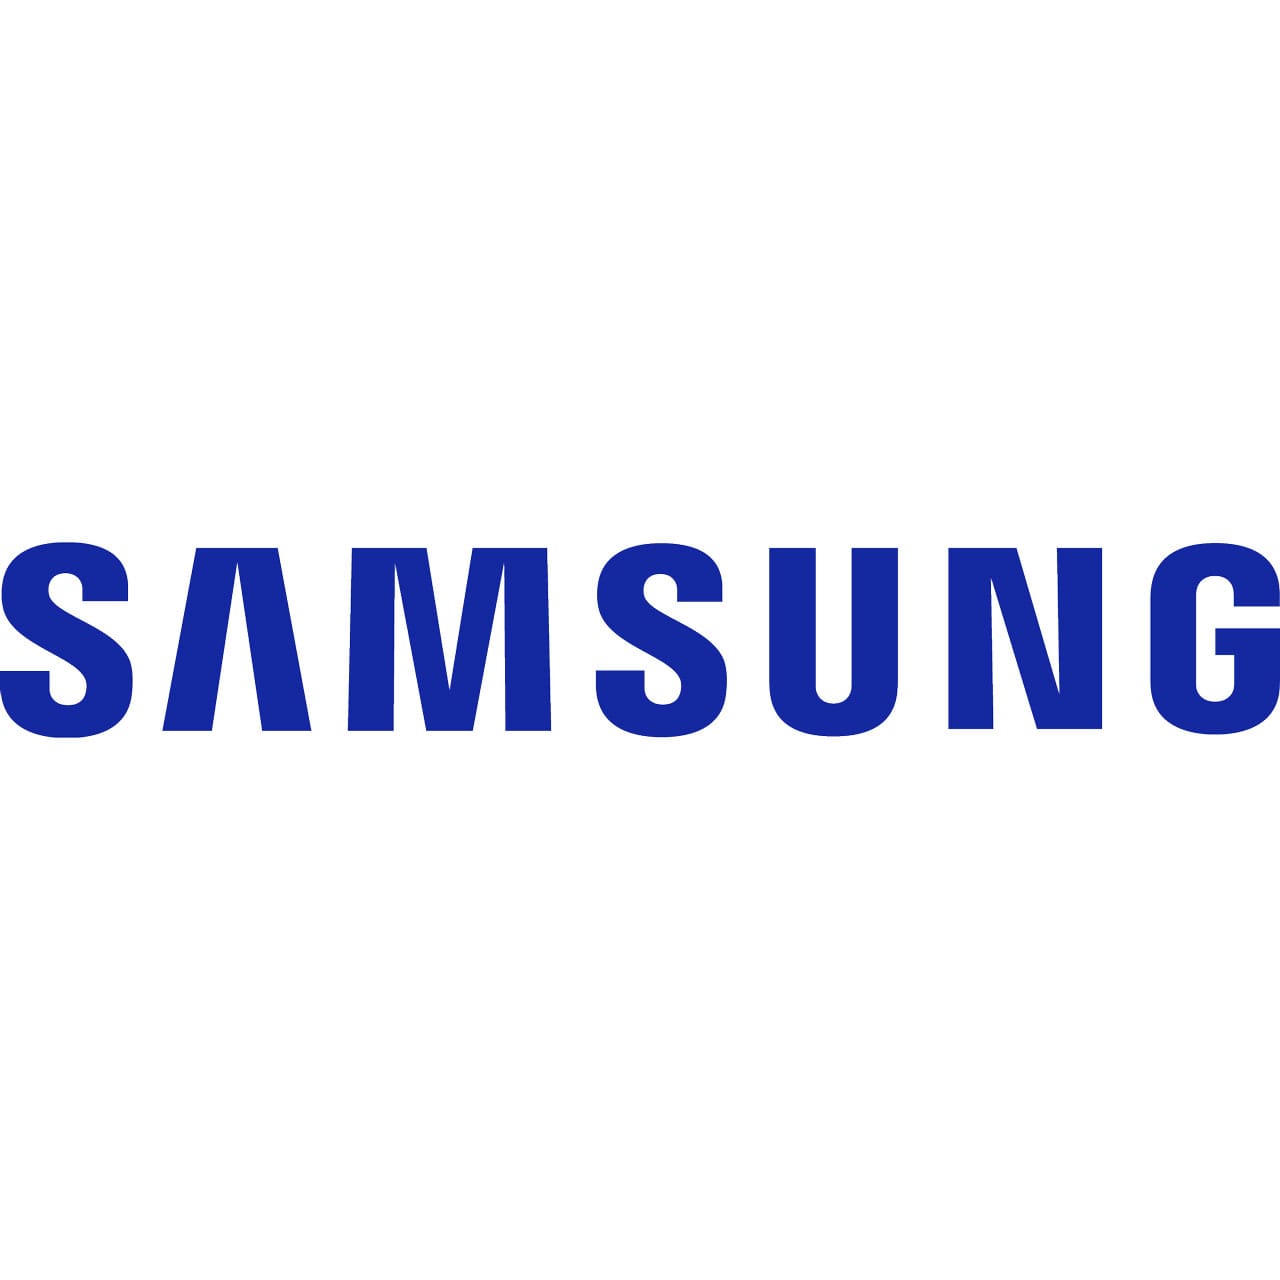 Samsung Smartphone Logo - Business Solutions, Services and Technology from Samsung